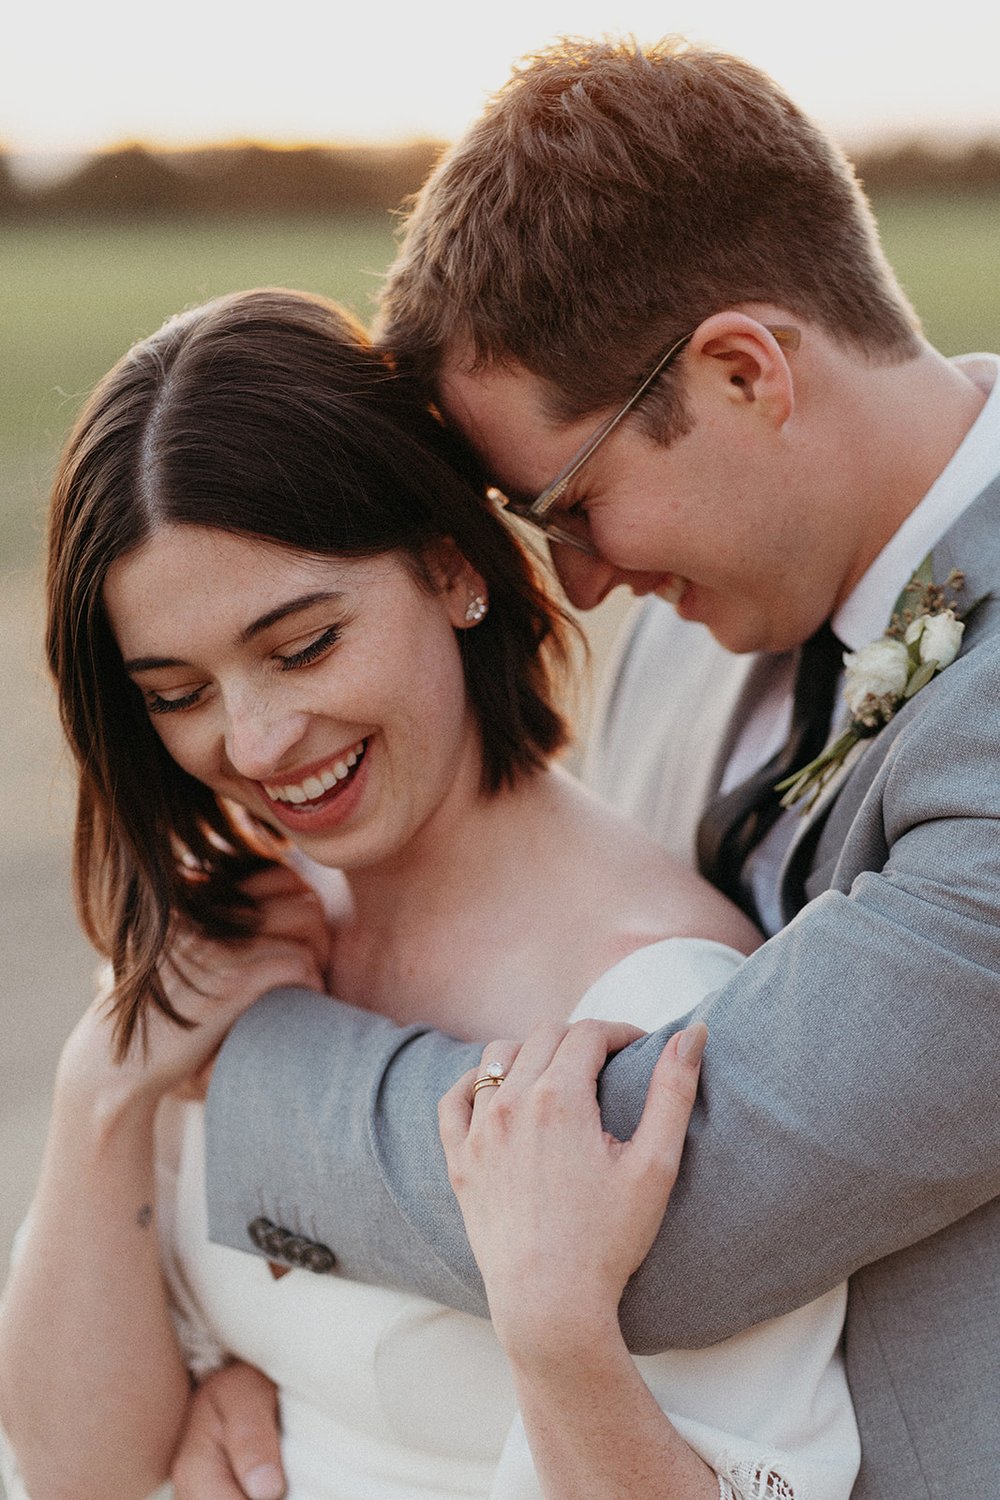 bride and groom portraits during golden hour with sunset